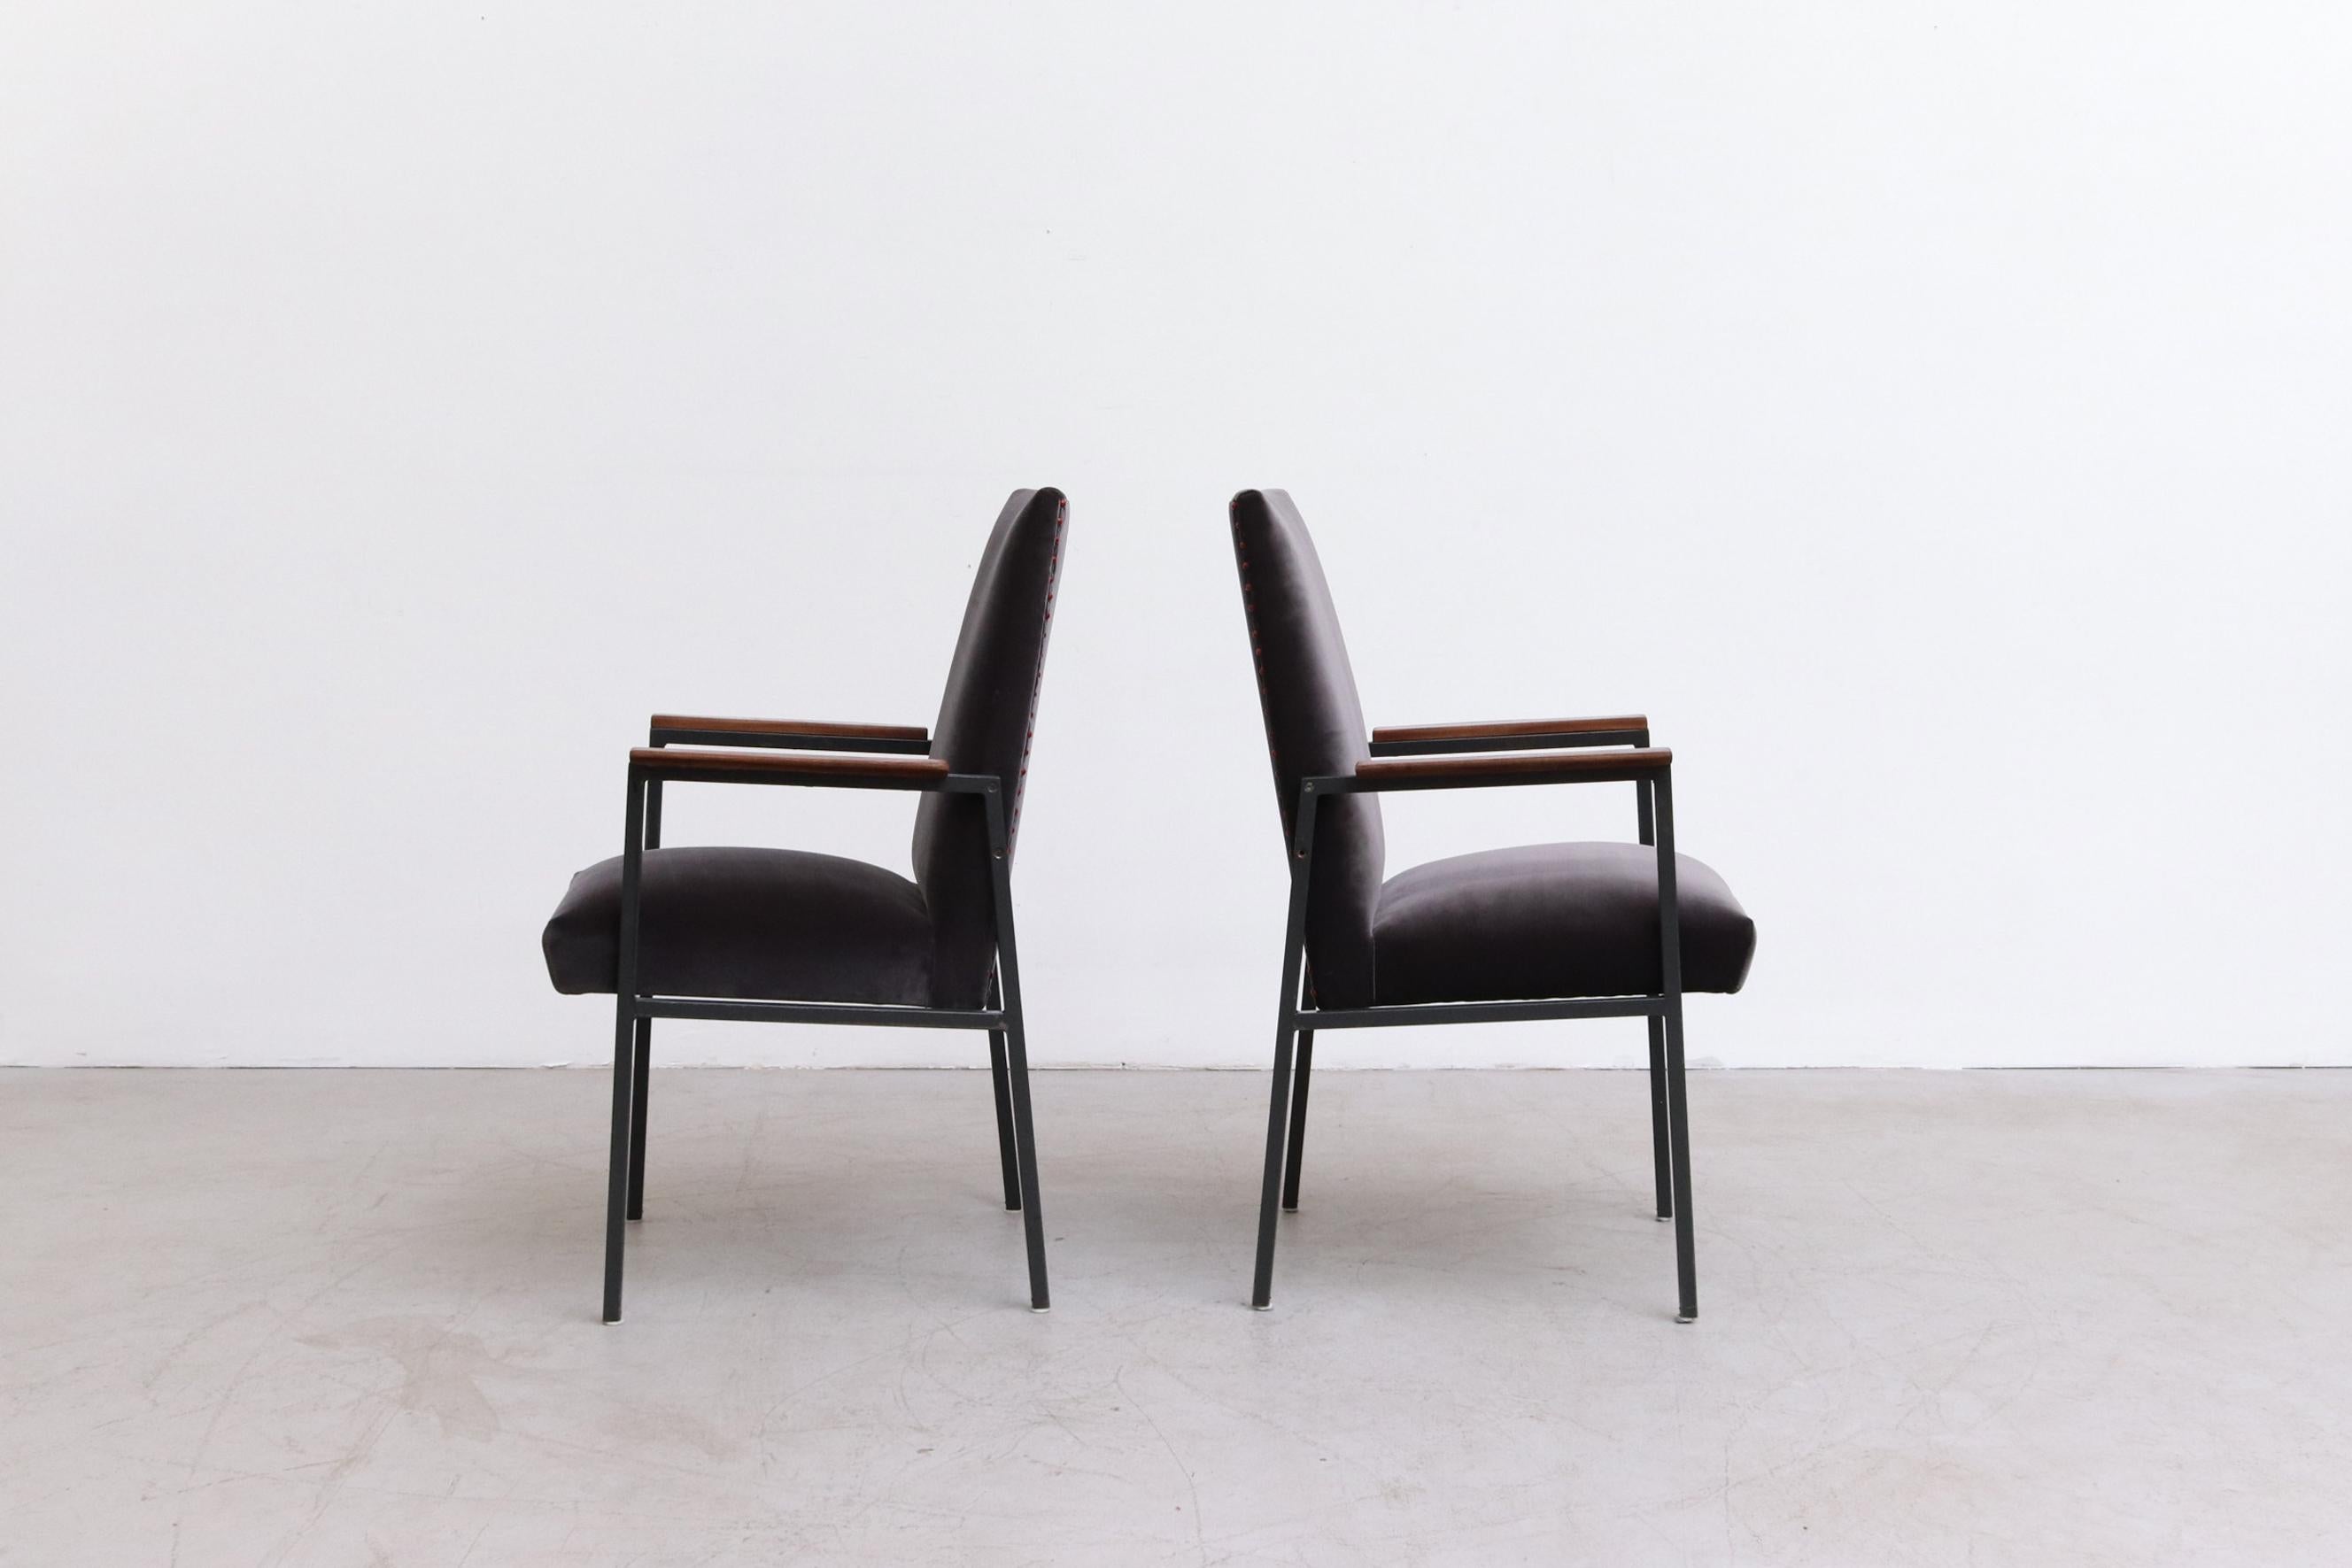 Enameled Pair of High Back Arm Chairs by Tijsselling